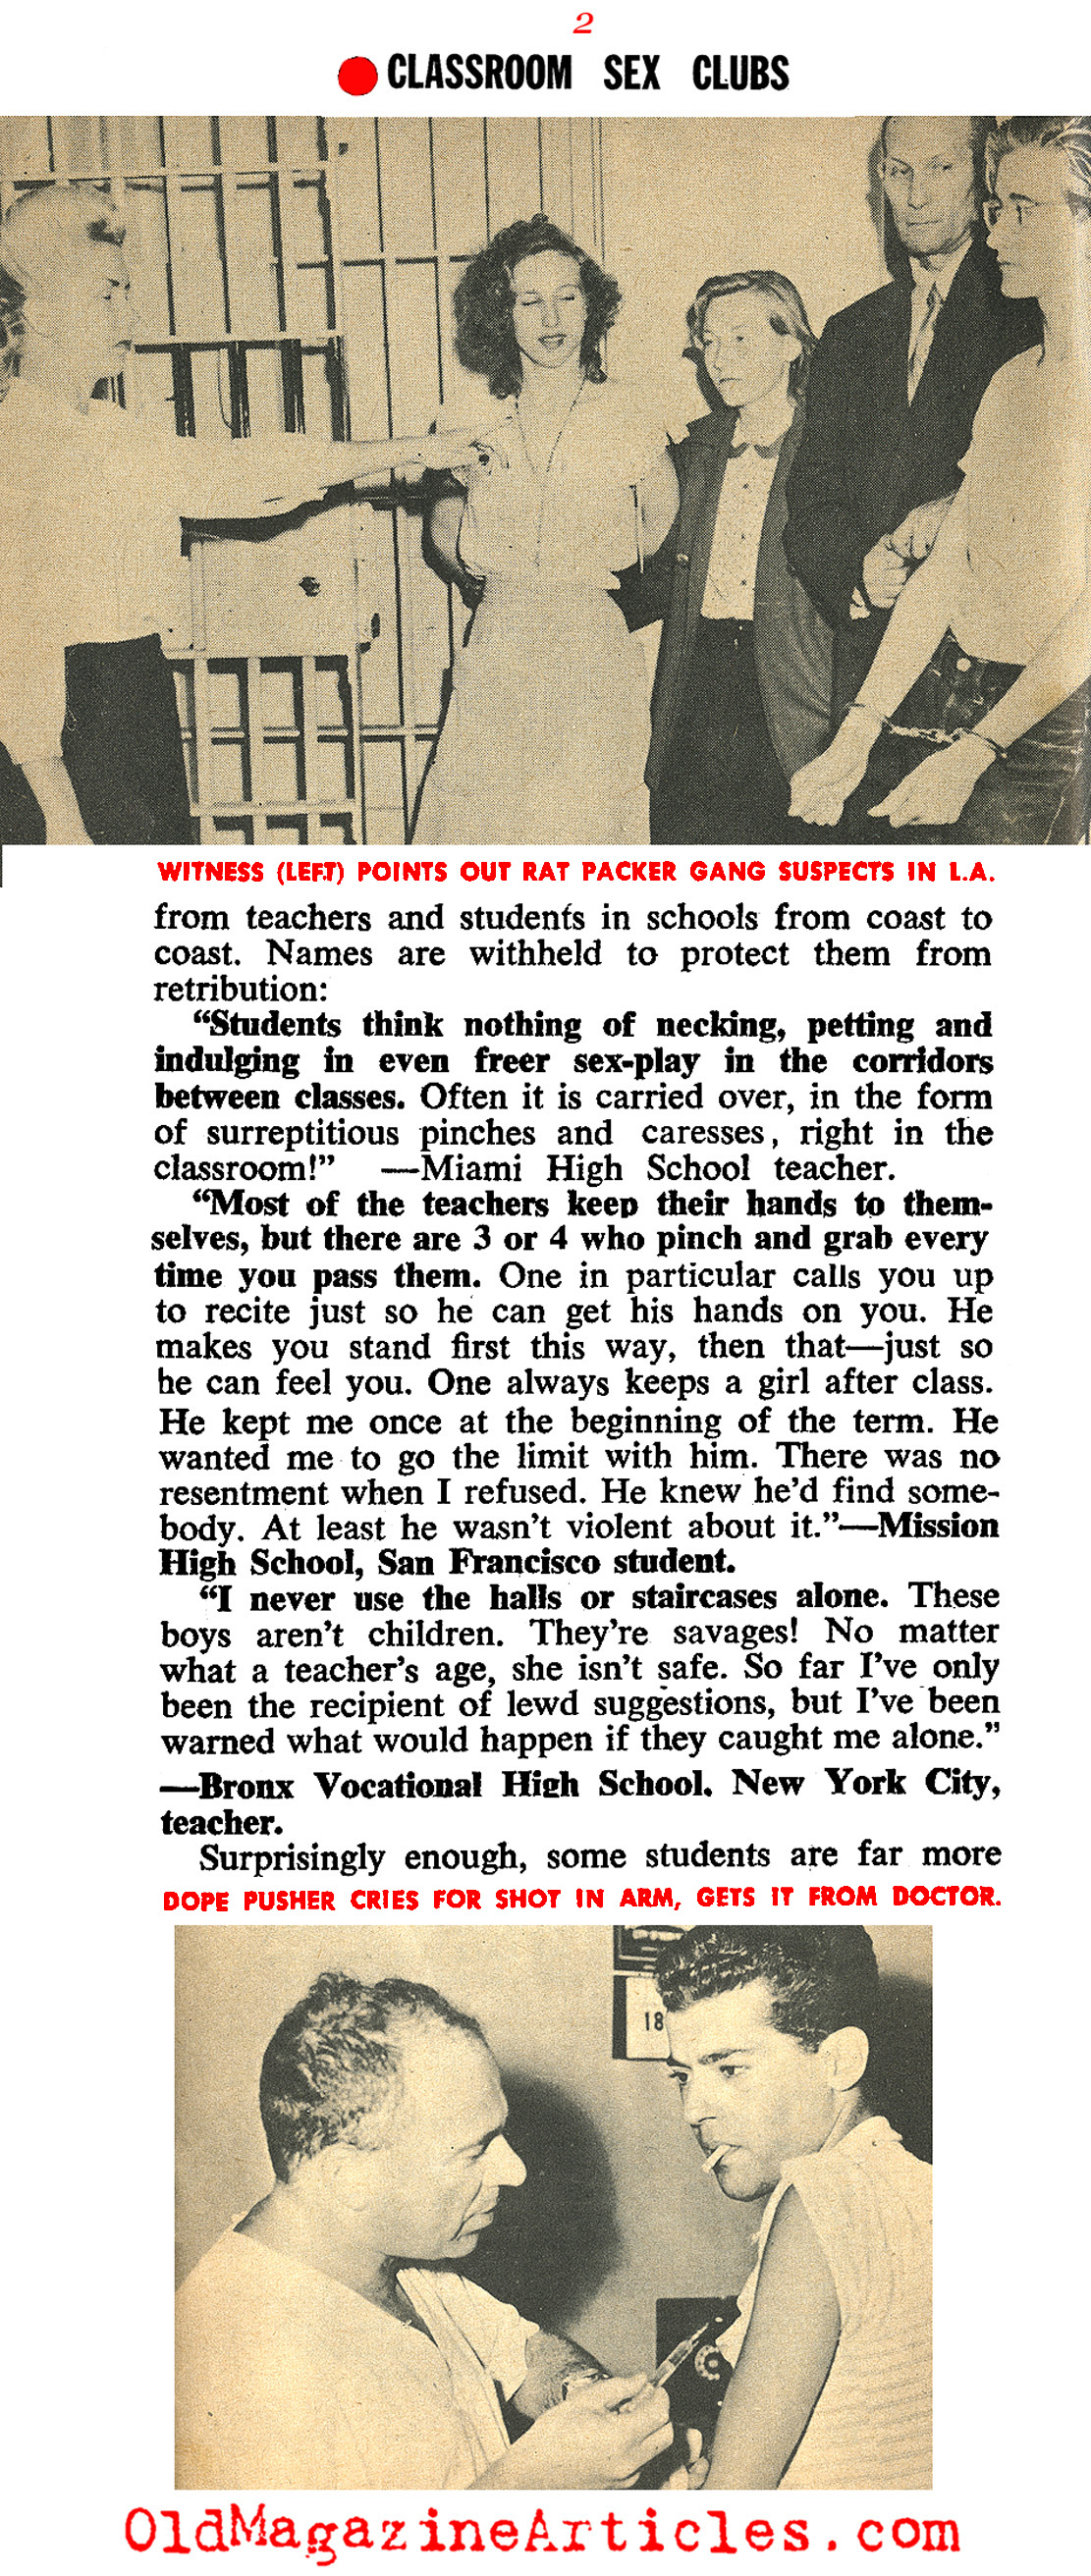 Delinquency and Other Shenanigans (Quick Magazine, 1955)